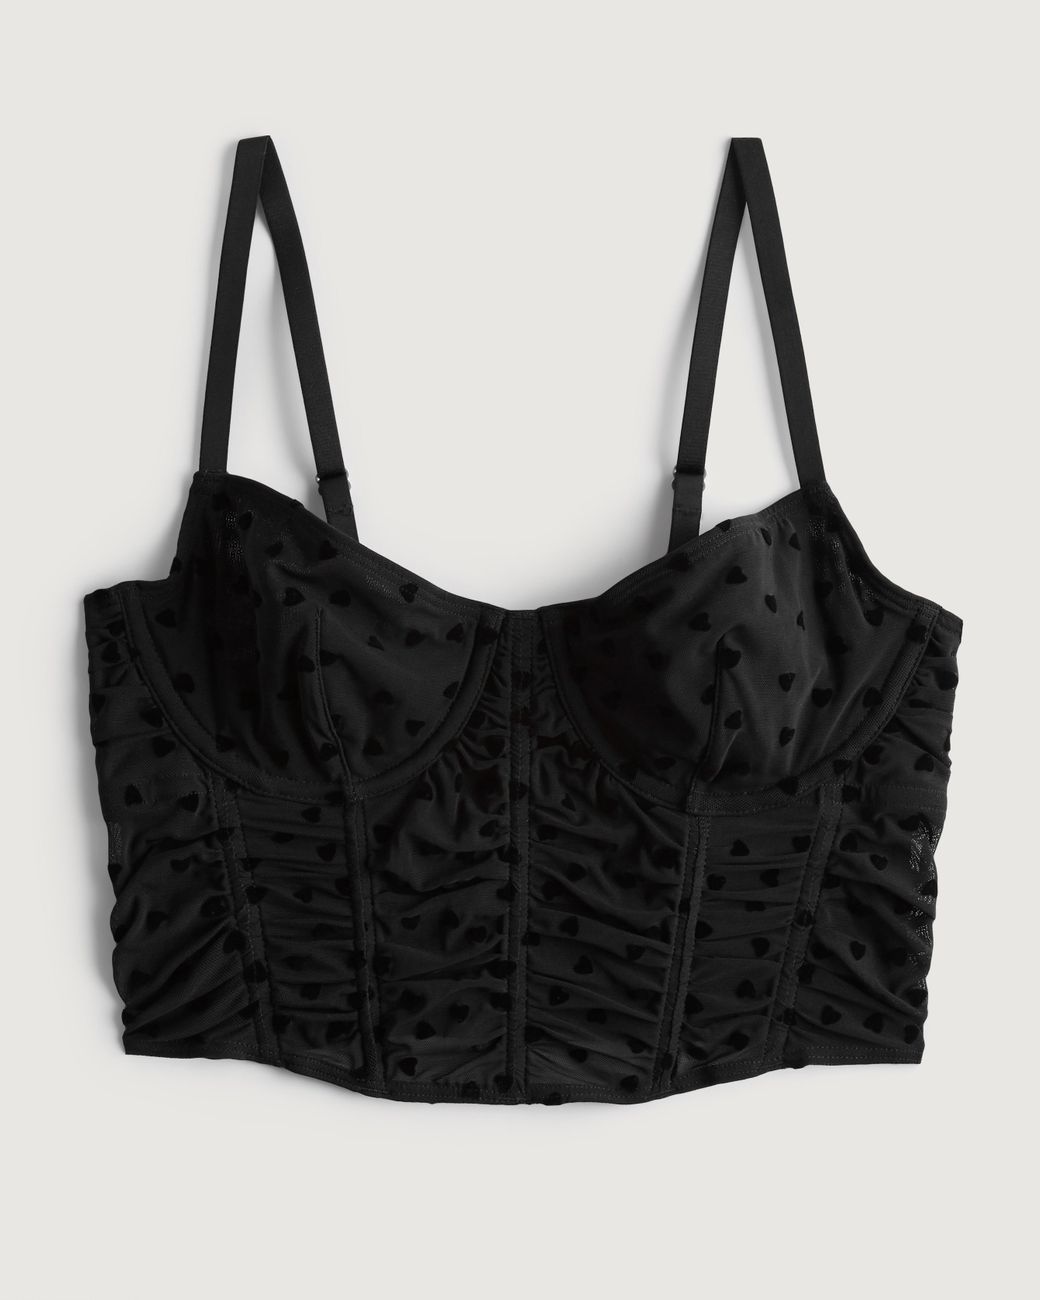 Gilly Hicks FLORAL LACE TRIANGLE LONGLINE - Bustier - black